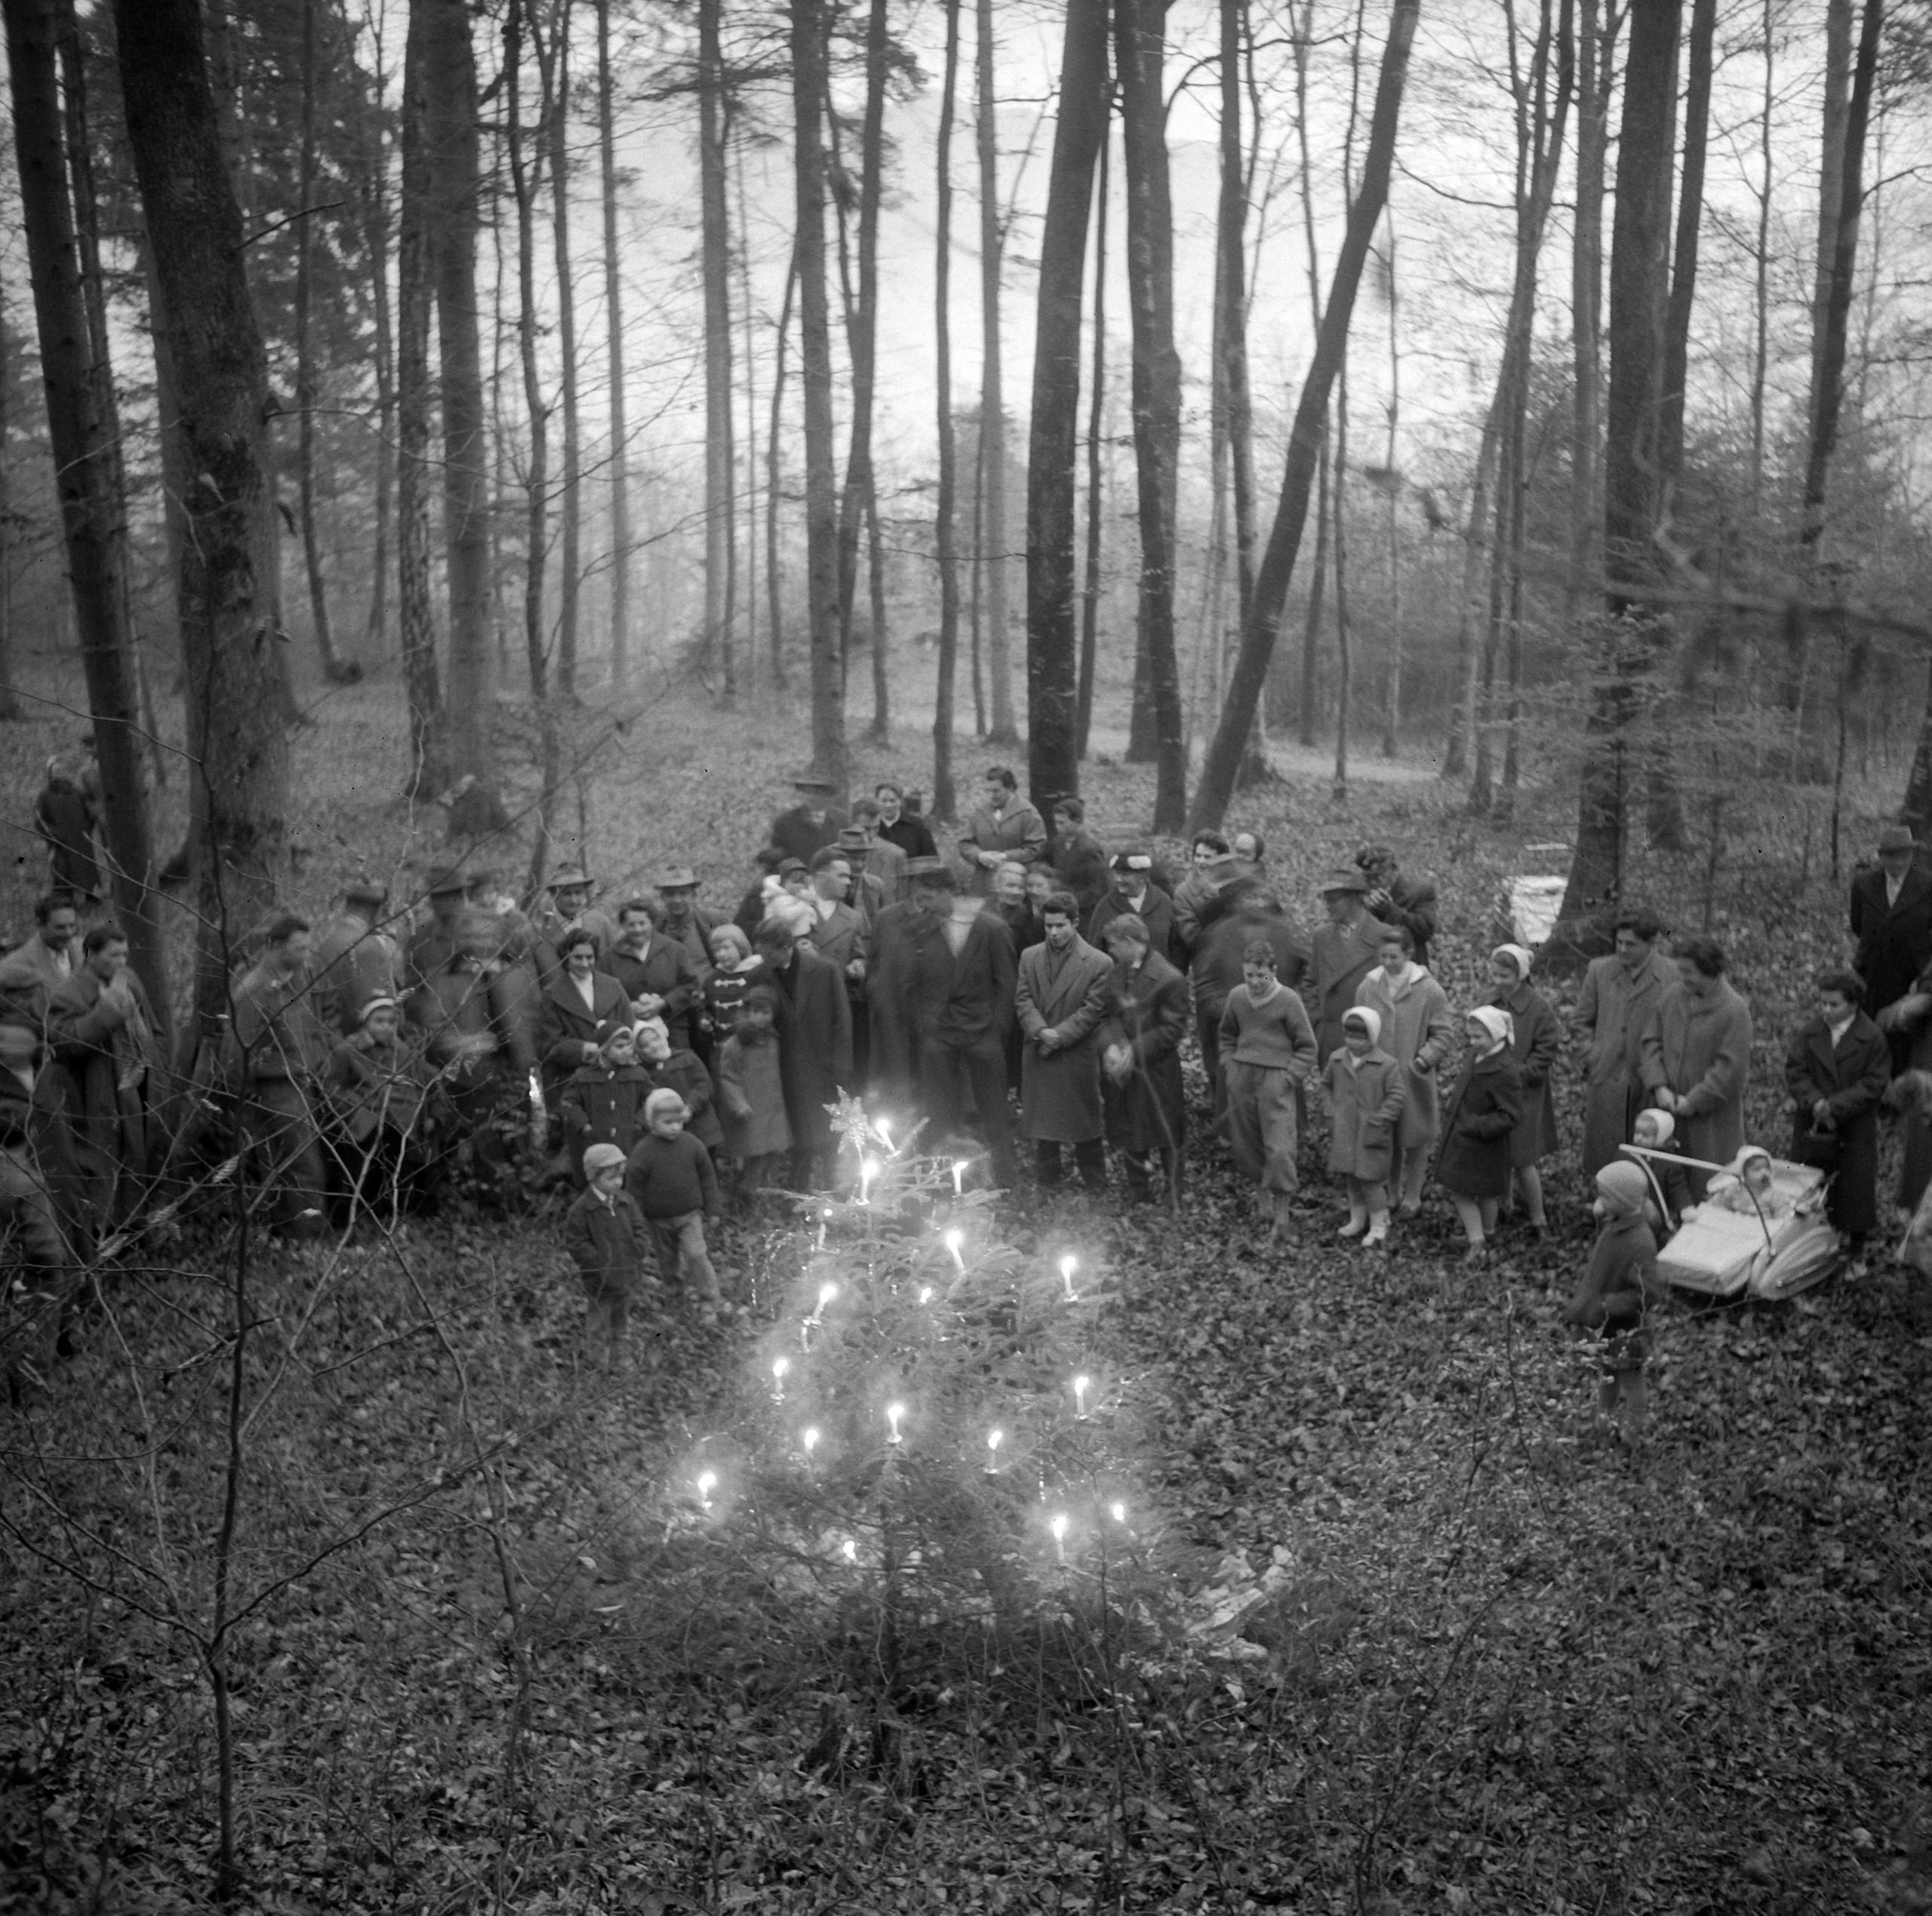 People gathered around an illuminated tree in forest